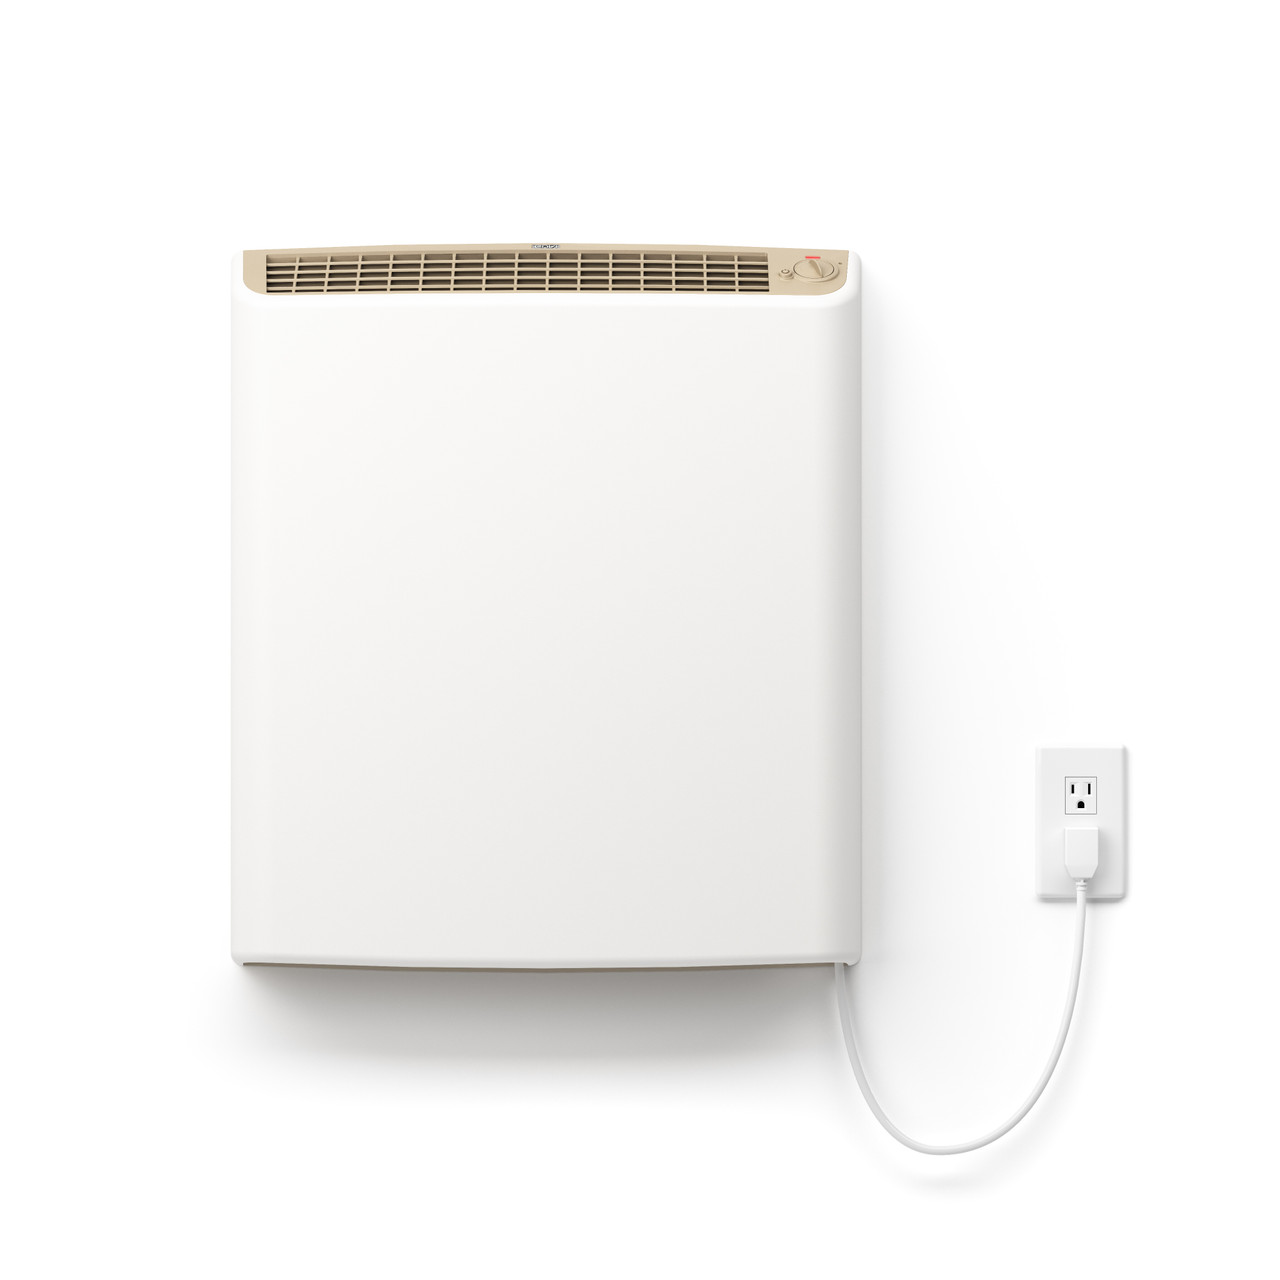 https://cdn11.bigcommerce.com/s-kcny5/images/stencil/1280x1280/products/126/1857/1_EnviMAX_1000_Watt_Plug-in_Electric_Wall_Mounted_Heater_-_main_view__77662.1690577333.jpg?c=2